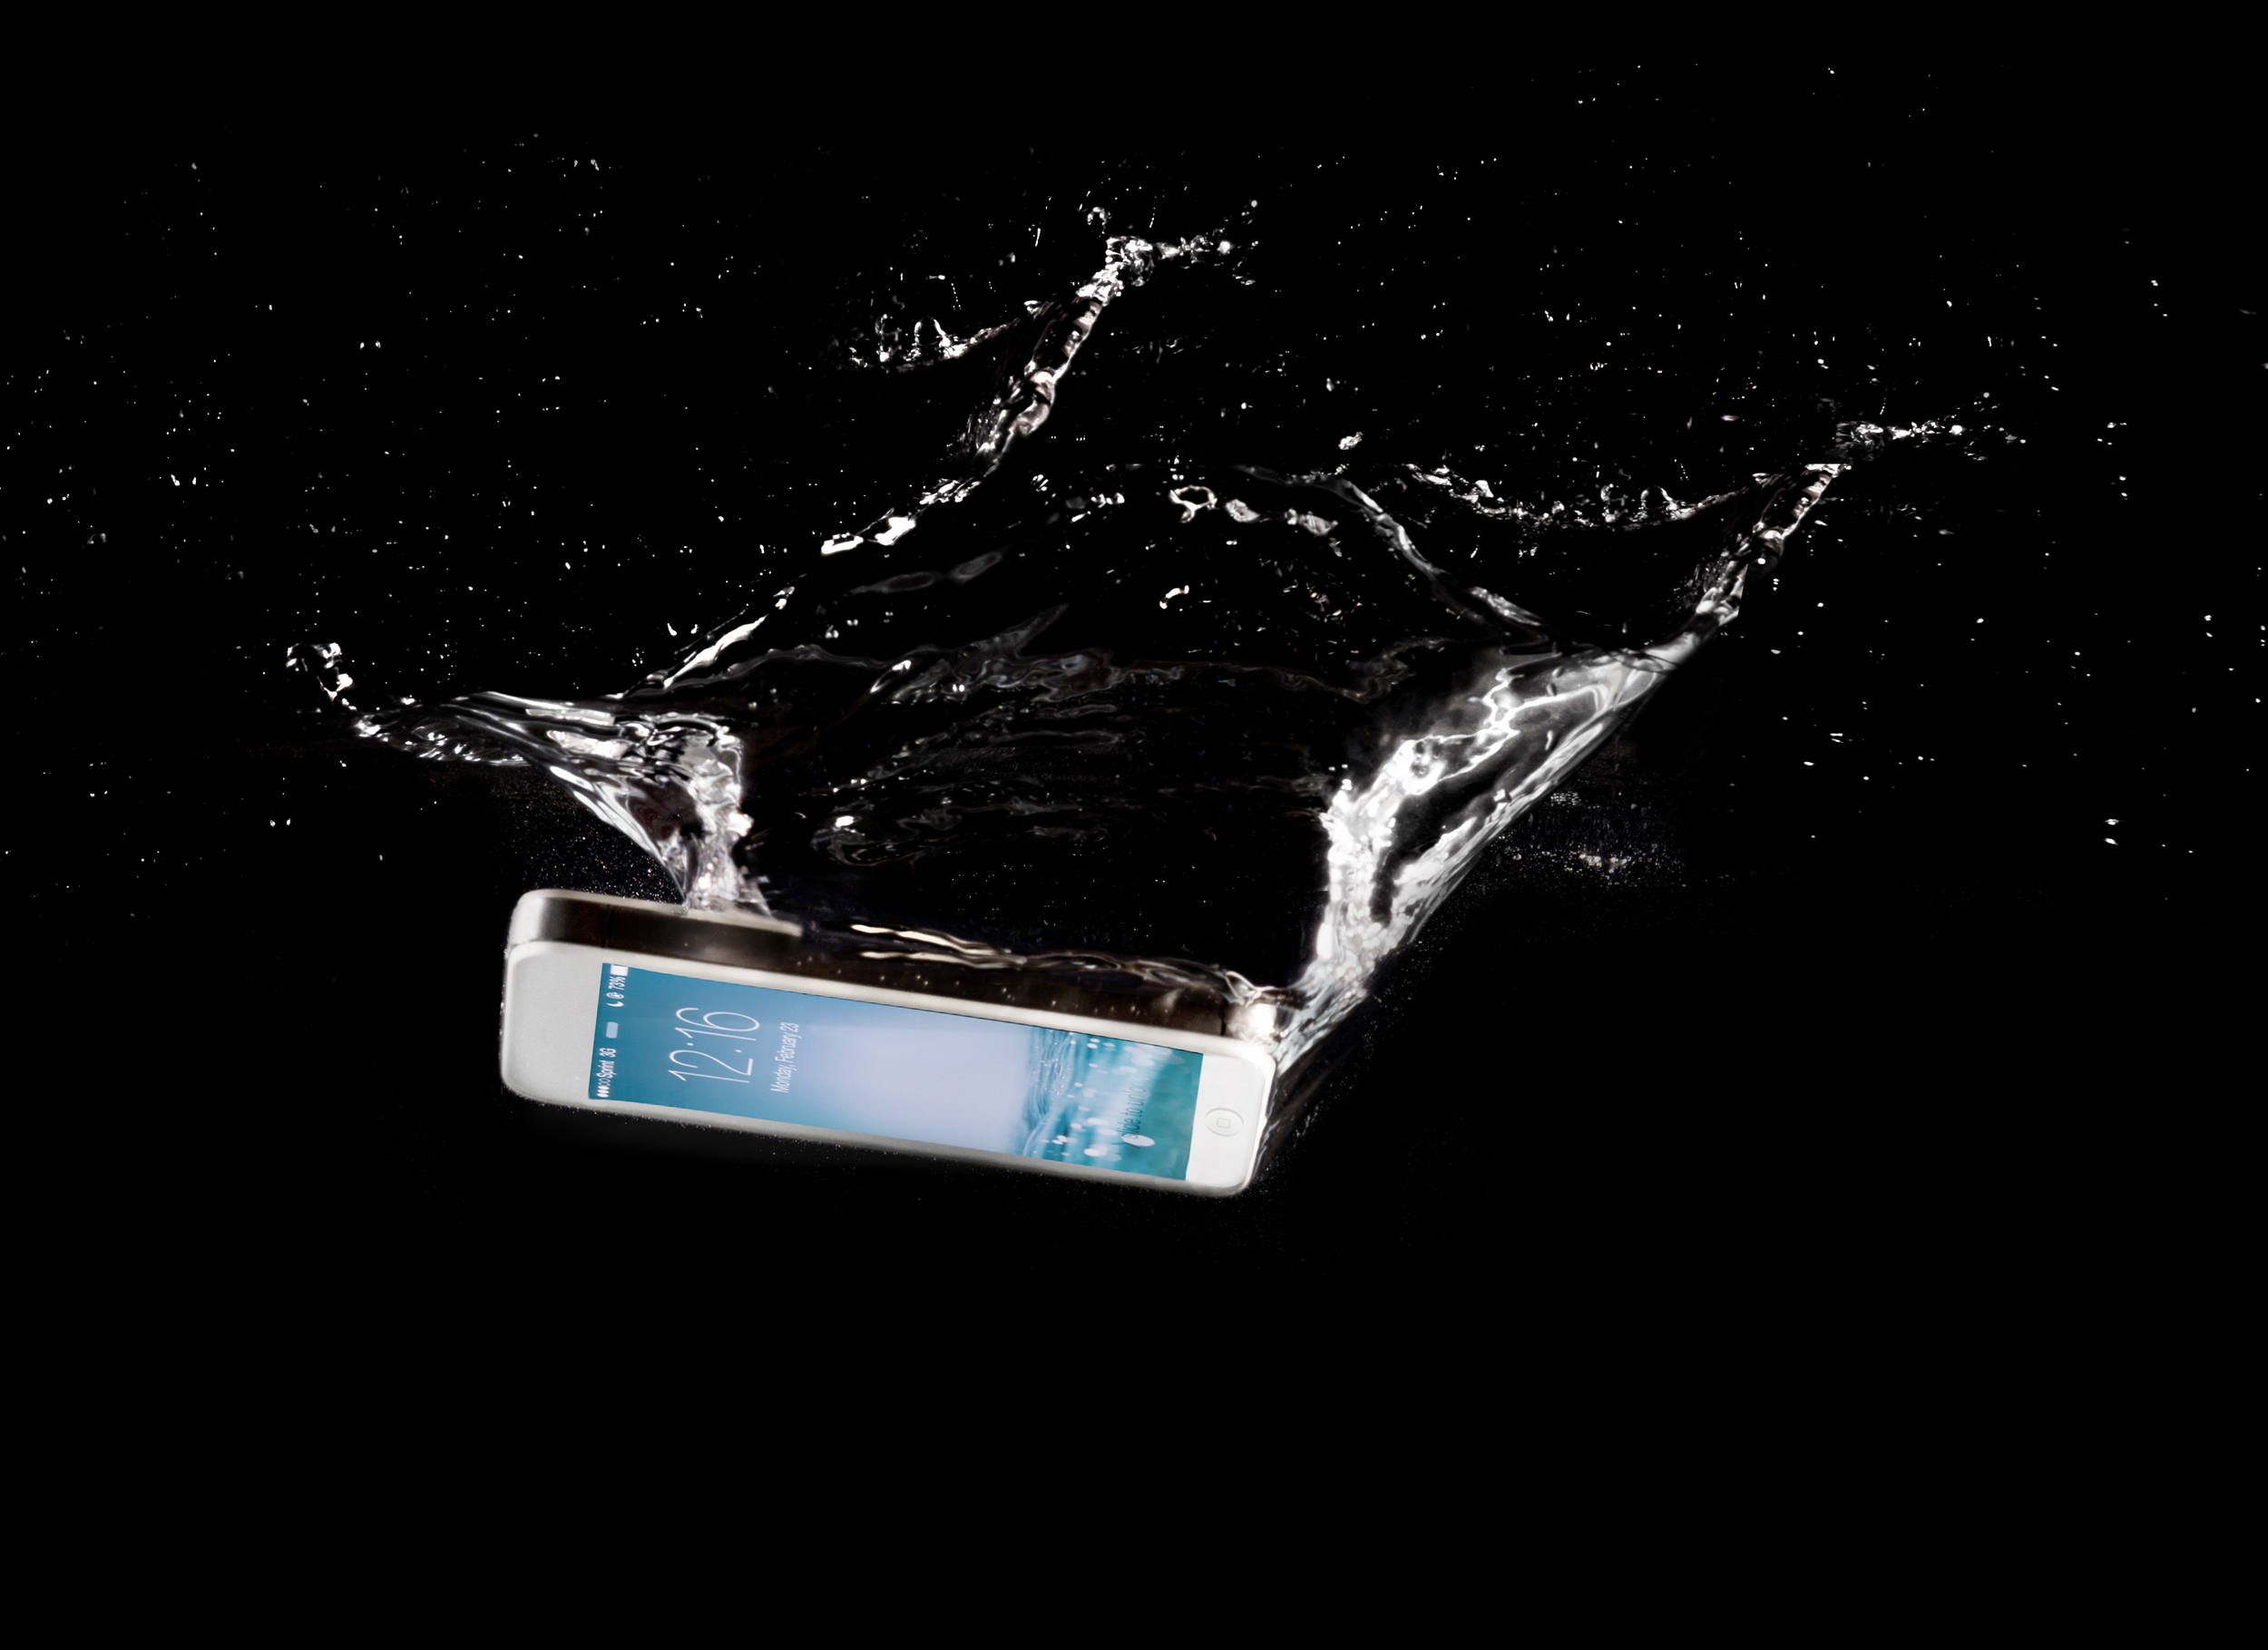 Commercial photo of an Iphone splashing into water with the screen on in a black background.Utah Copyright 2016 InTheLoupePhotography